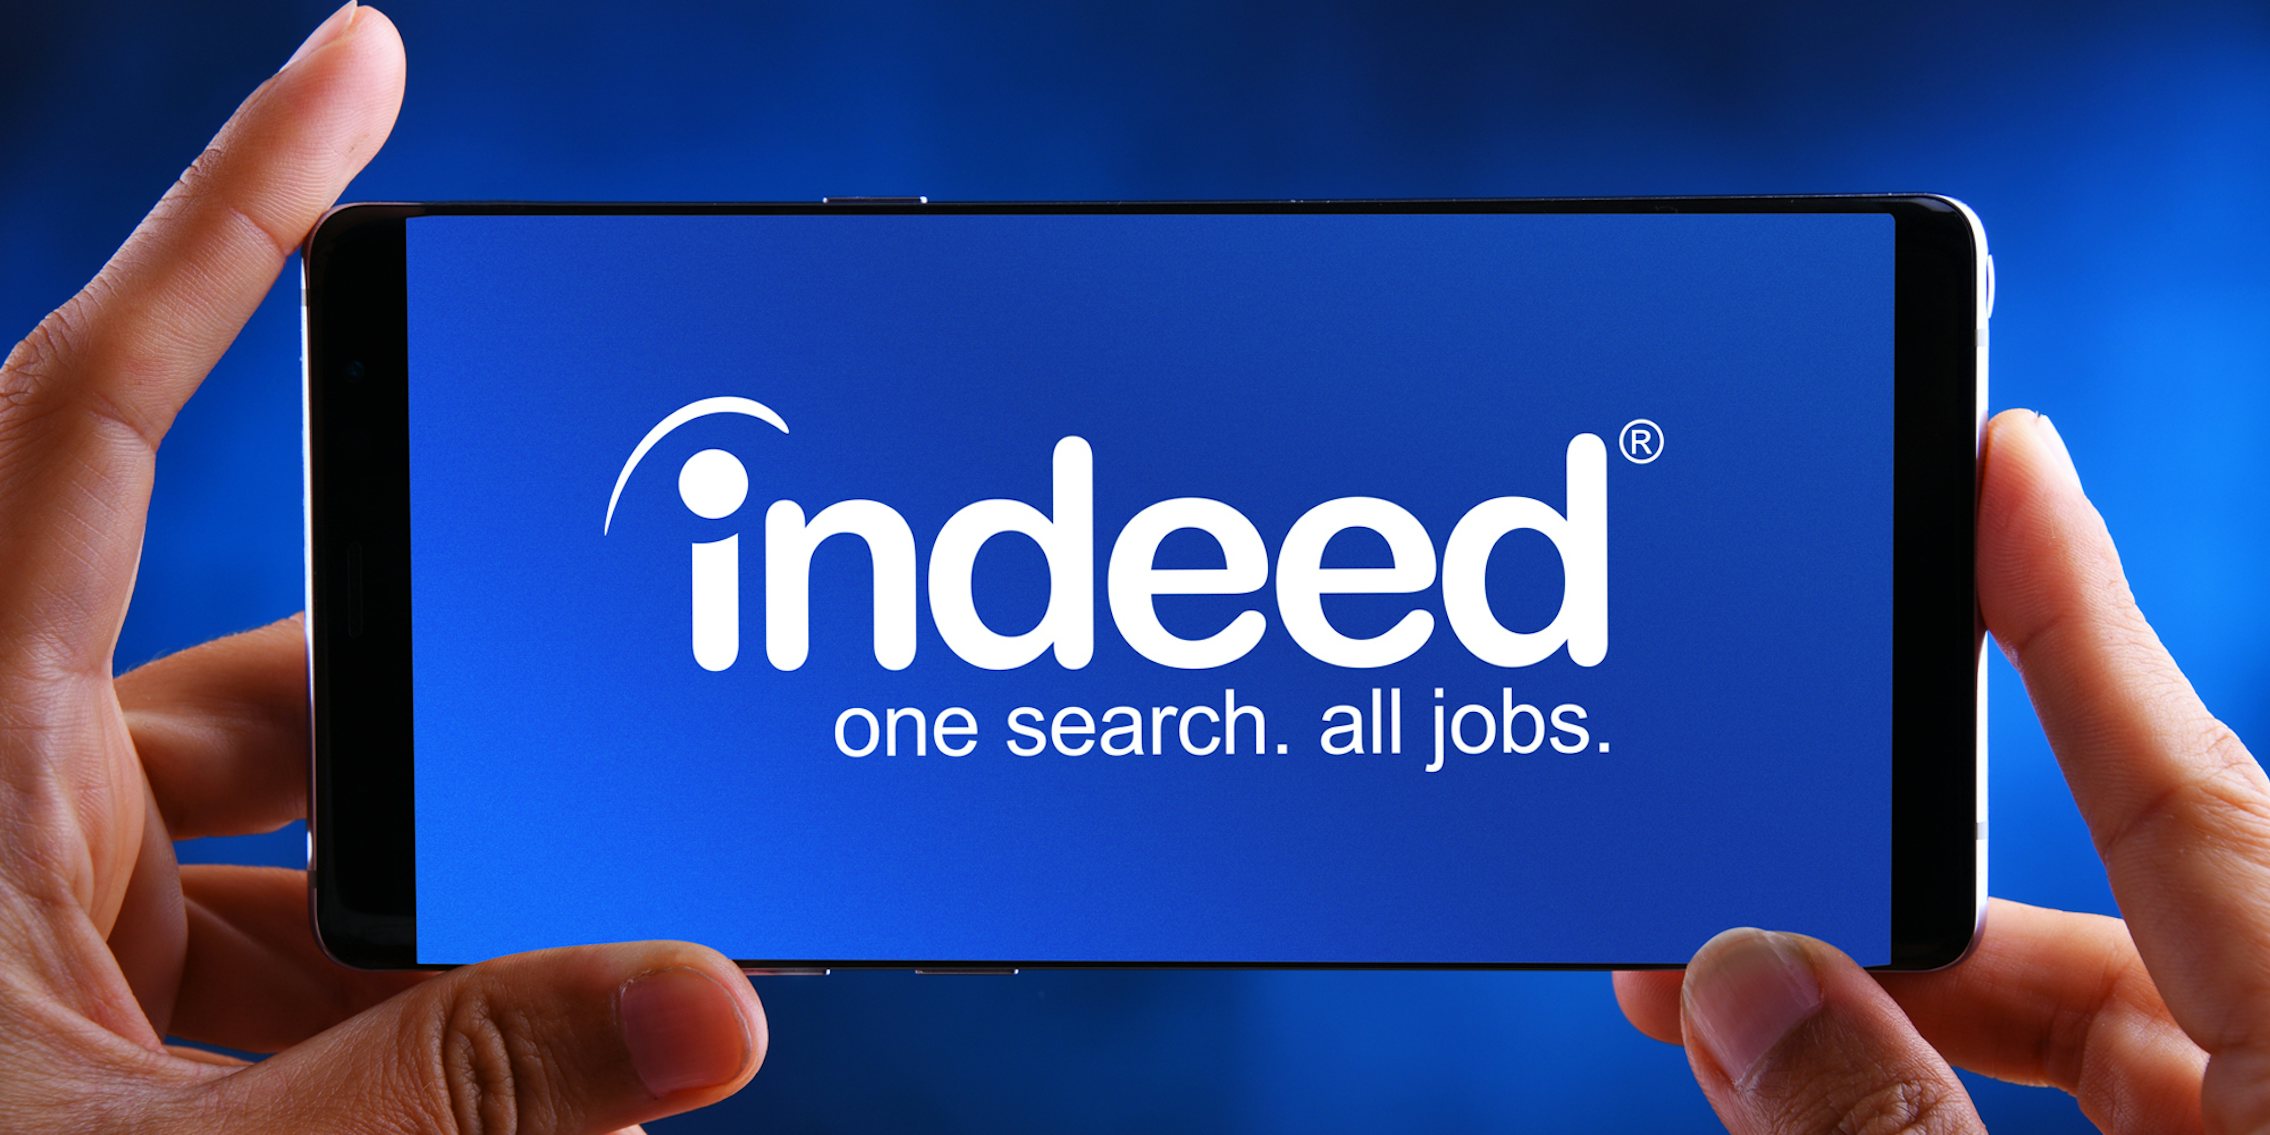 Indeed job search app on phone in hands in front of blue background